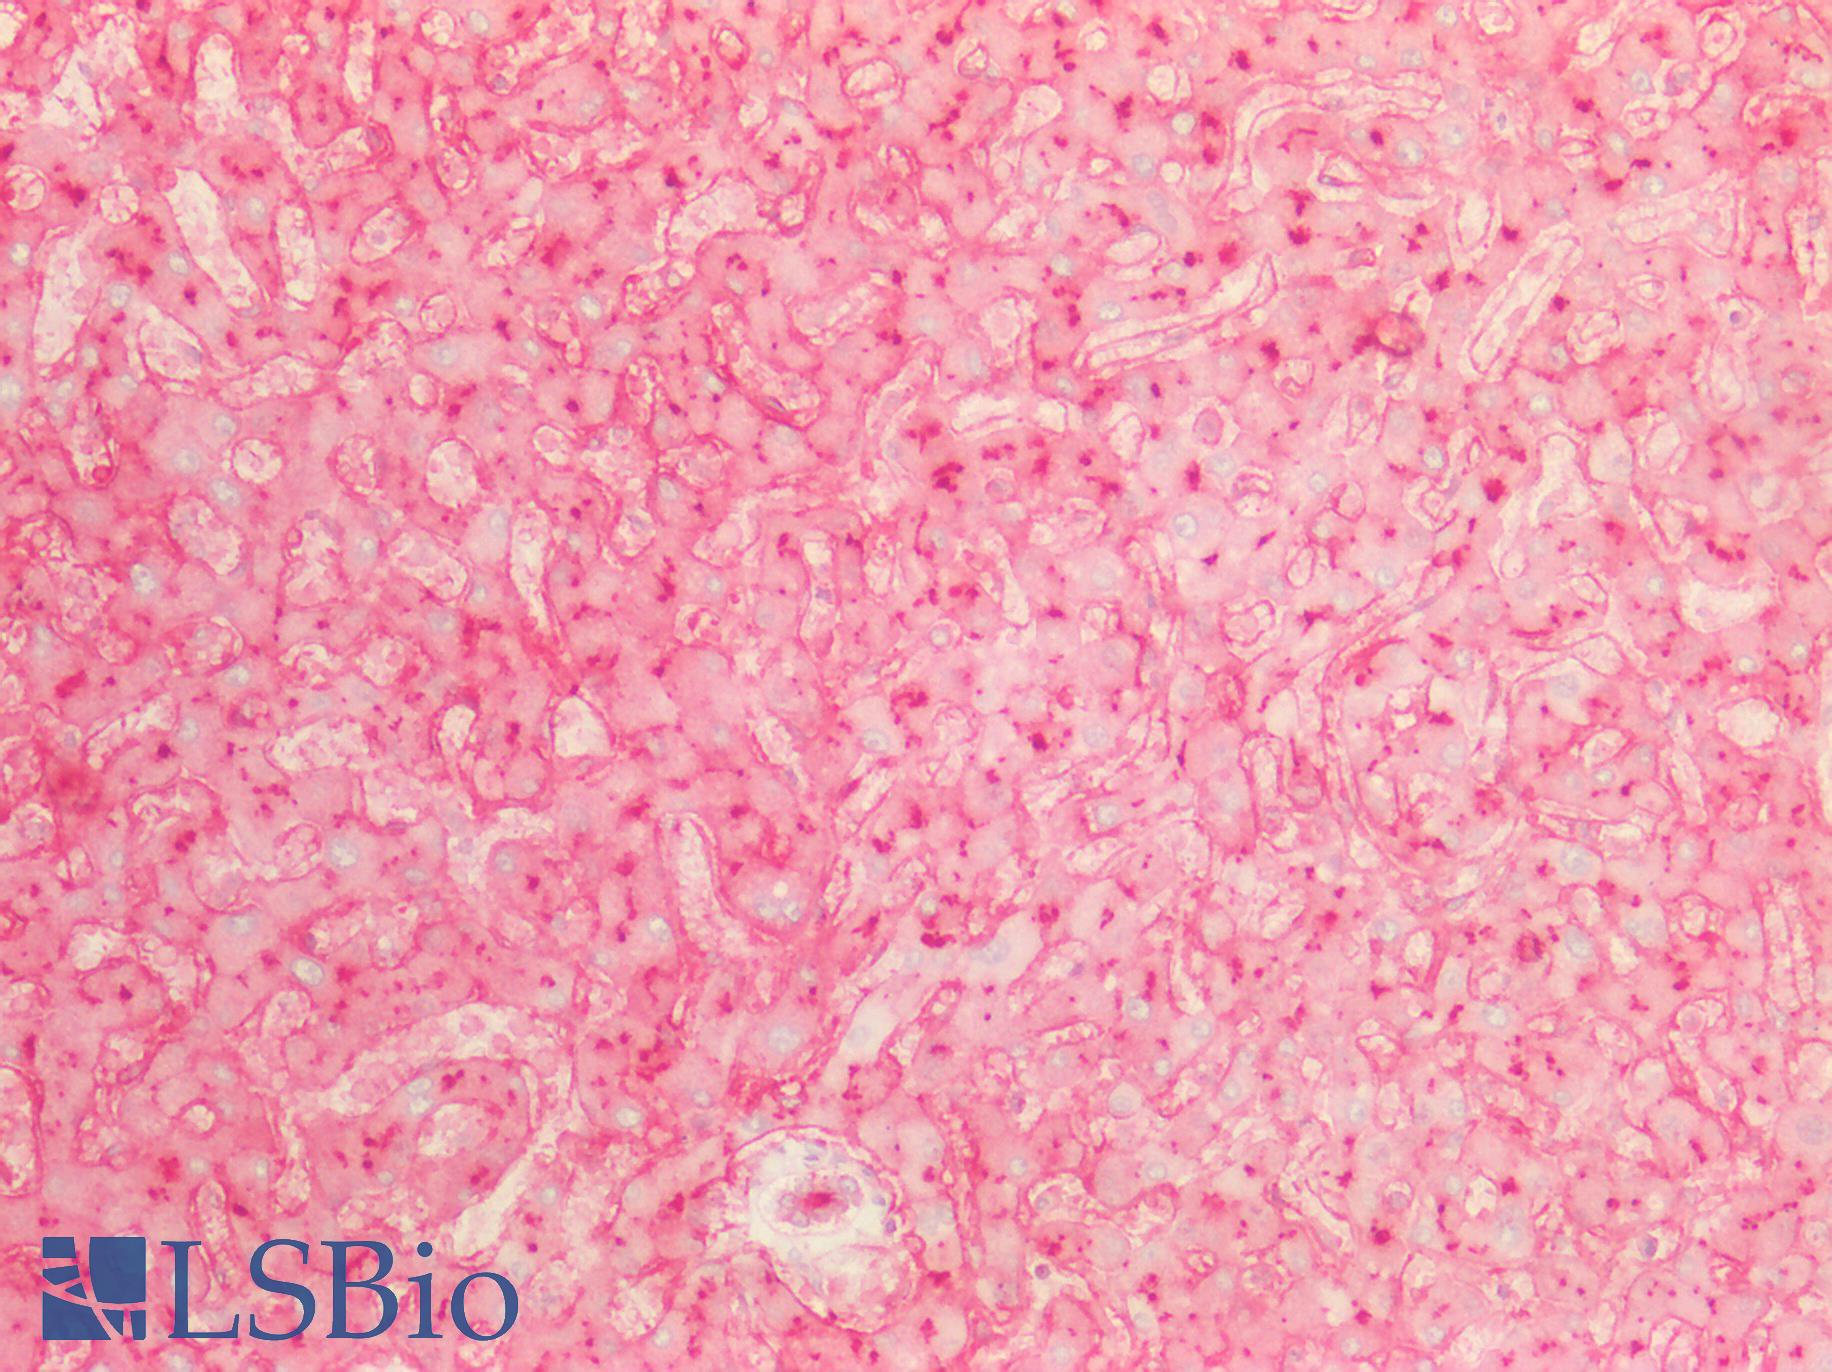 ANPEP / CD13 Antibody - Human Liver: Formalin-Fixed, Paraffin-Embedded (FFPE)